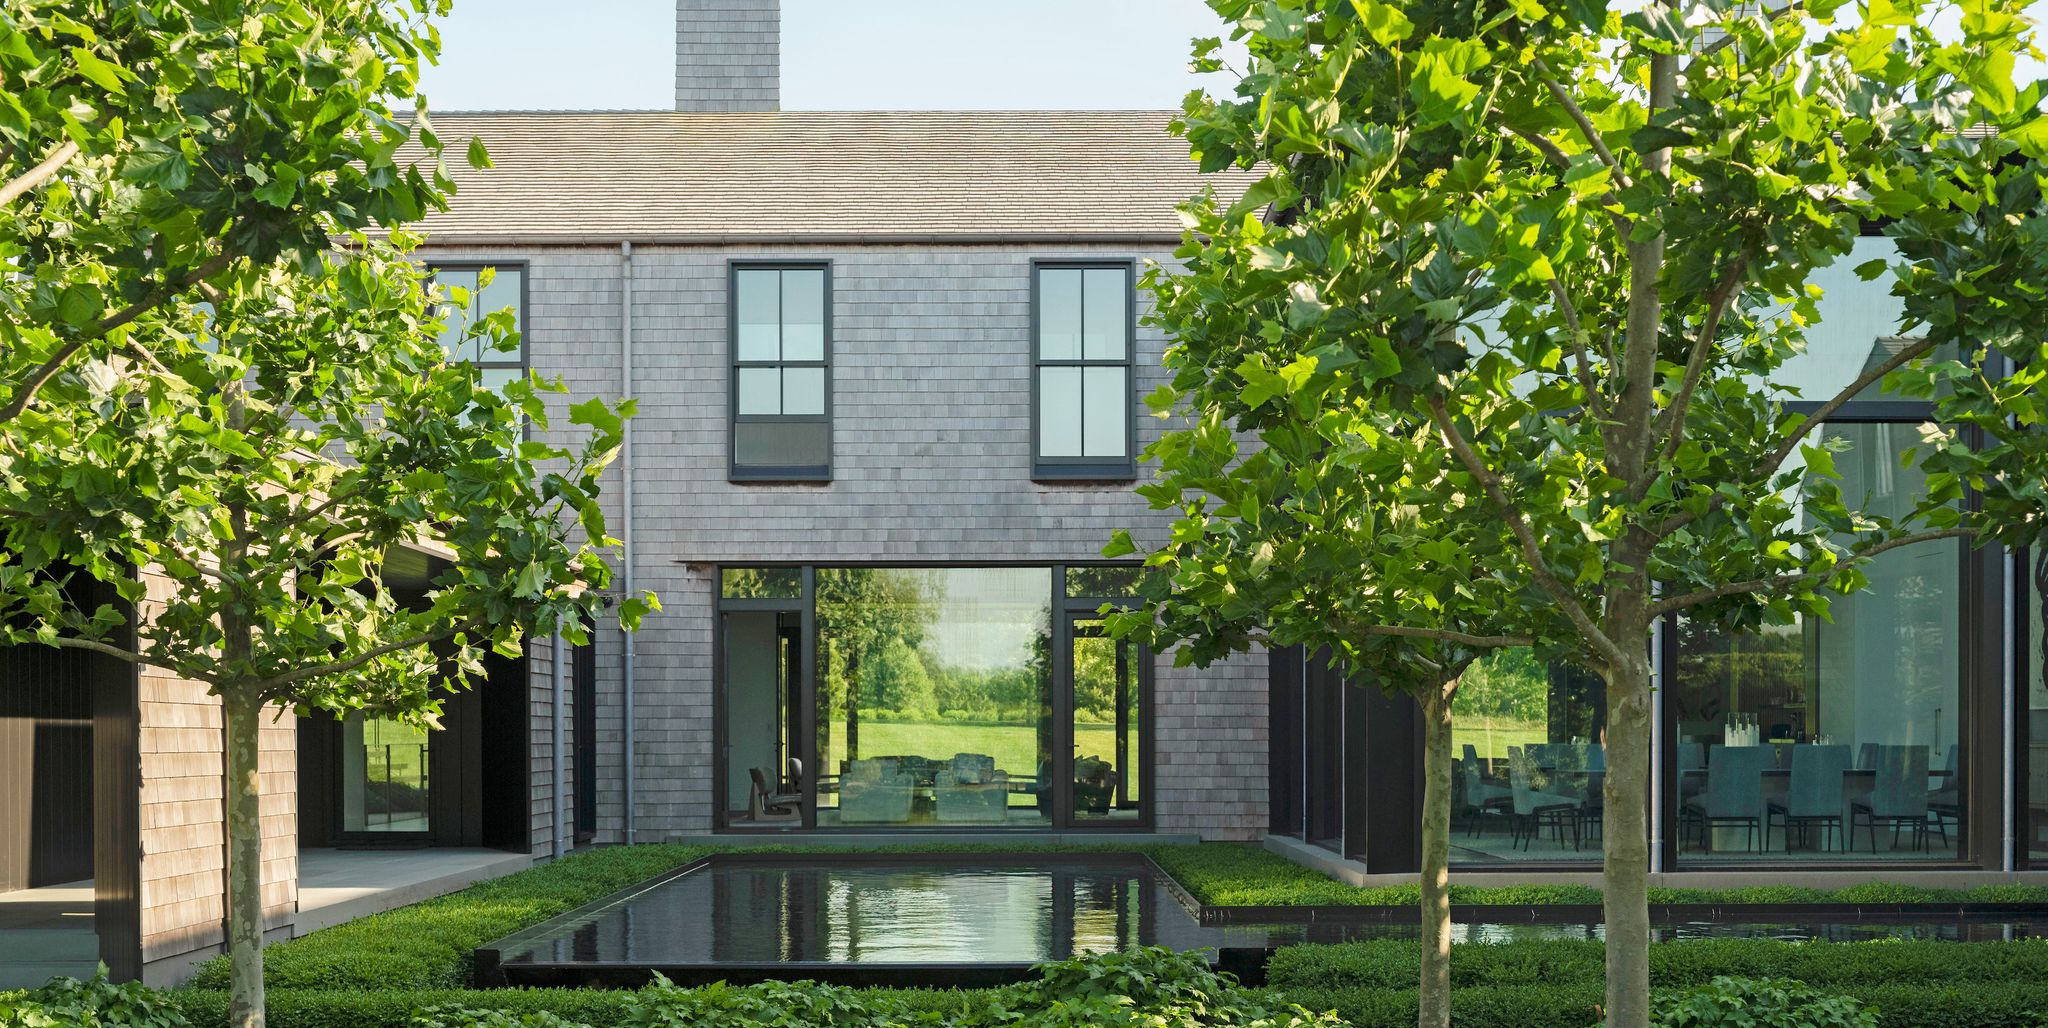 bridgehampton new york home pollarded plane trees give statuesque definition without obscuring views